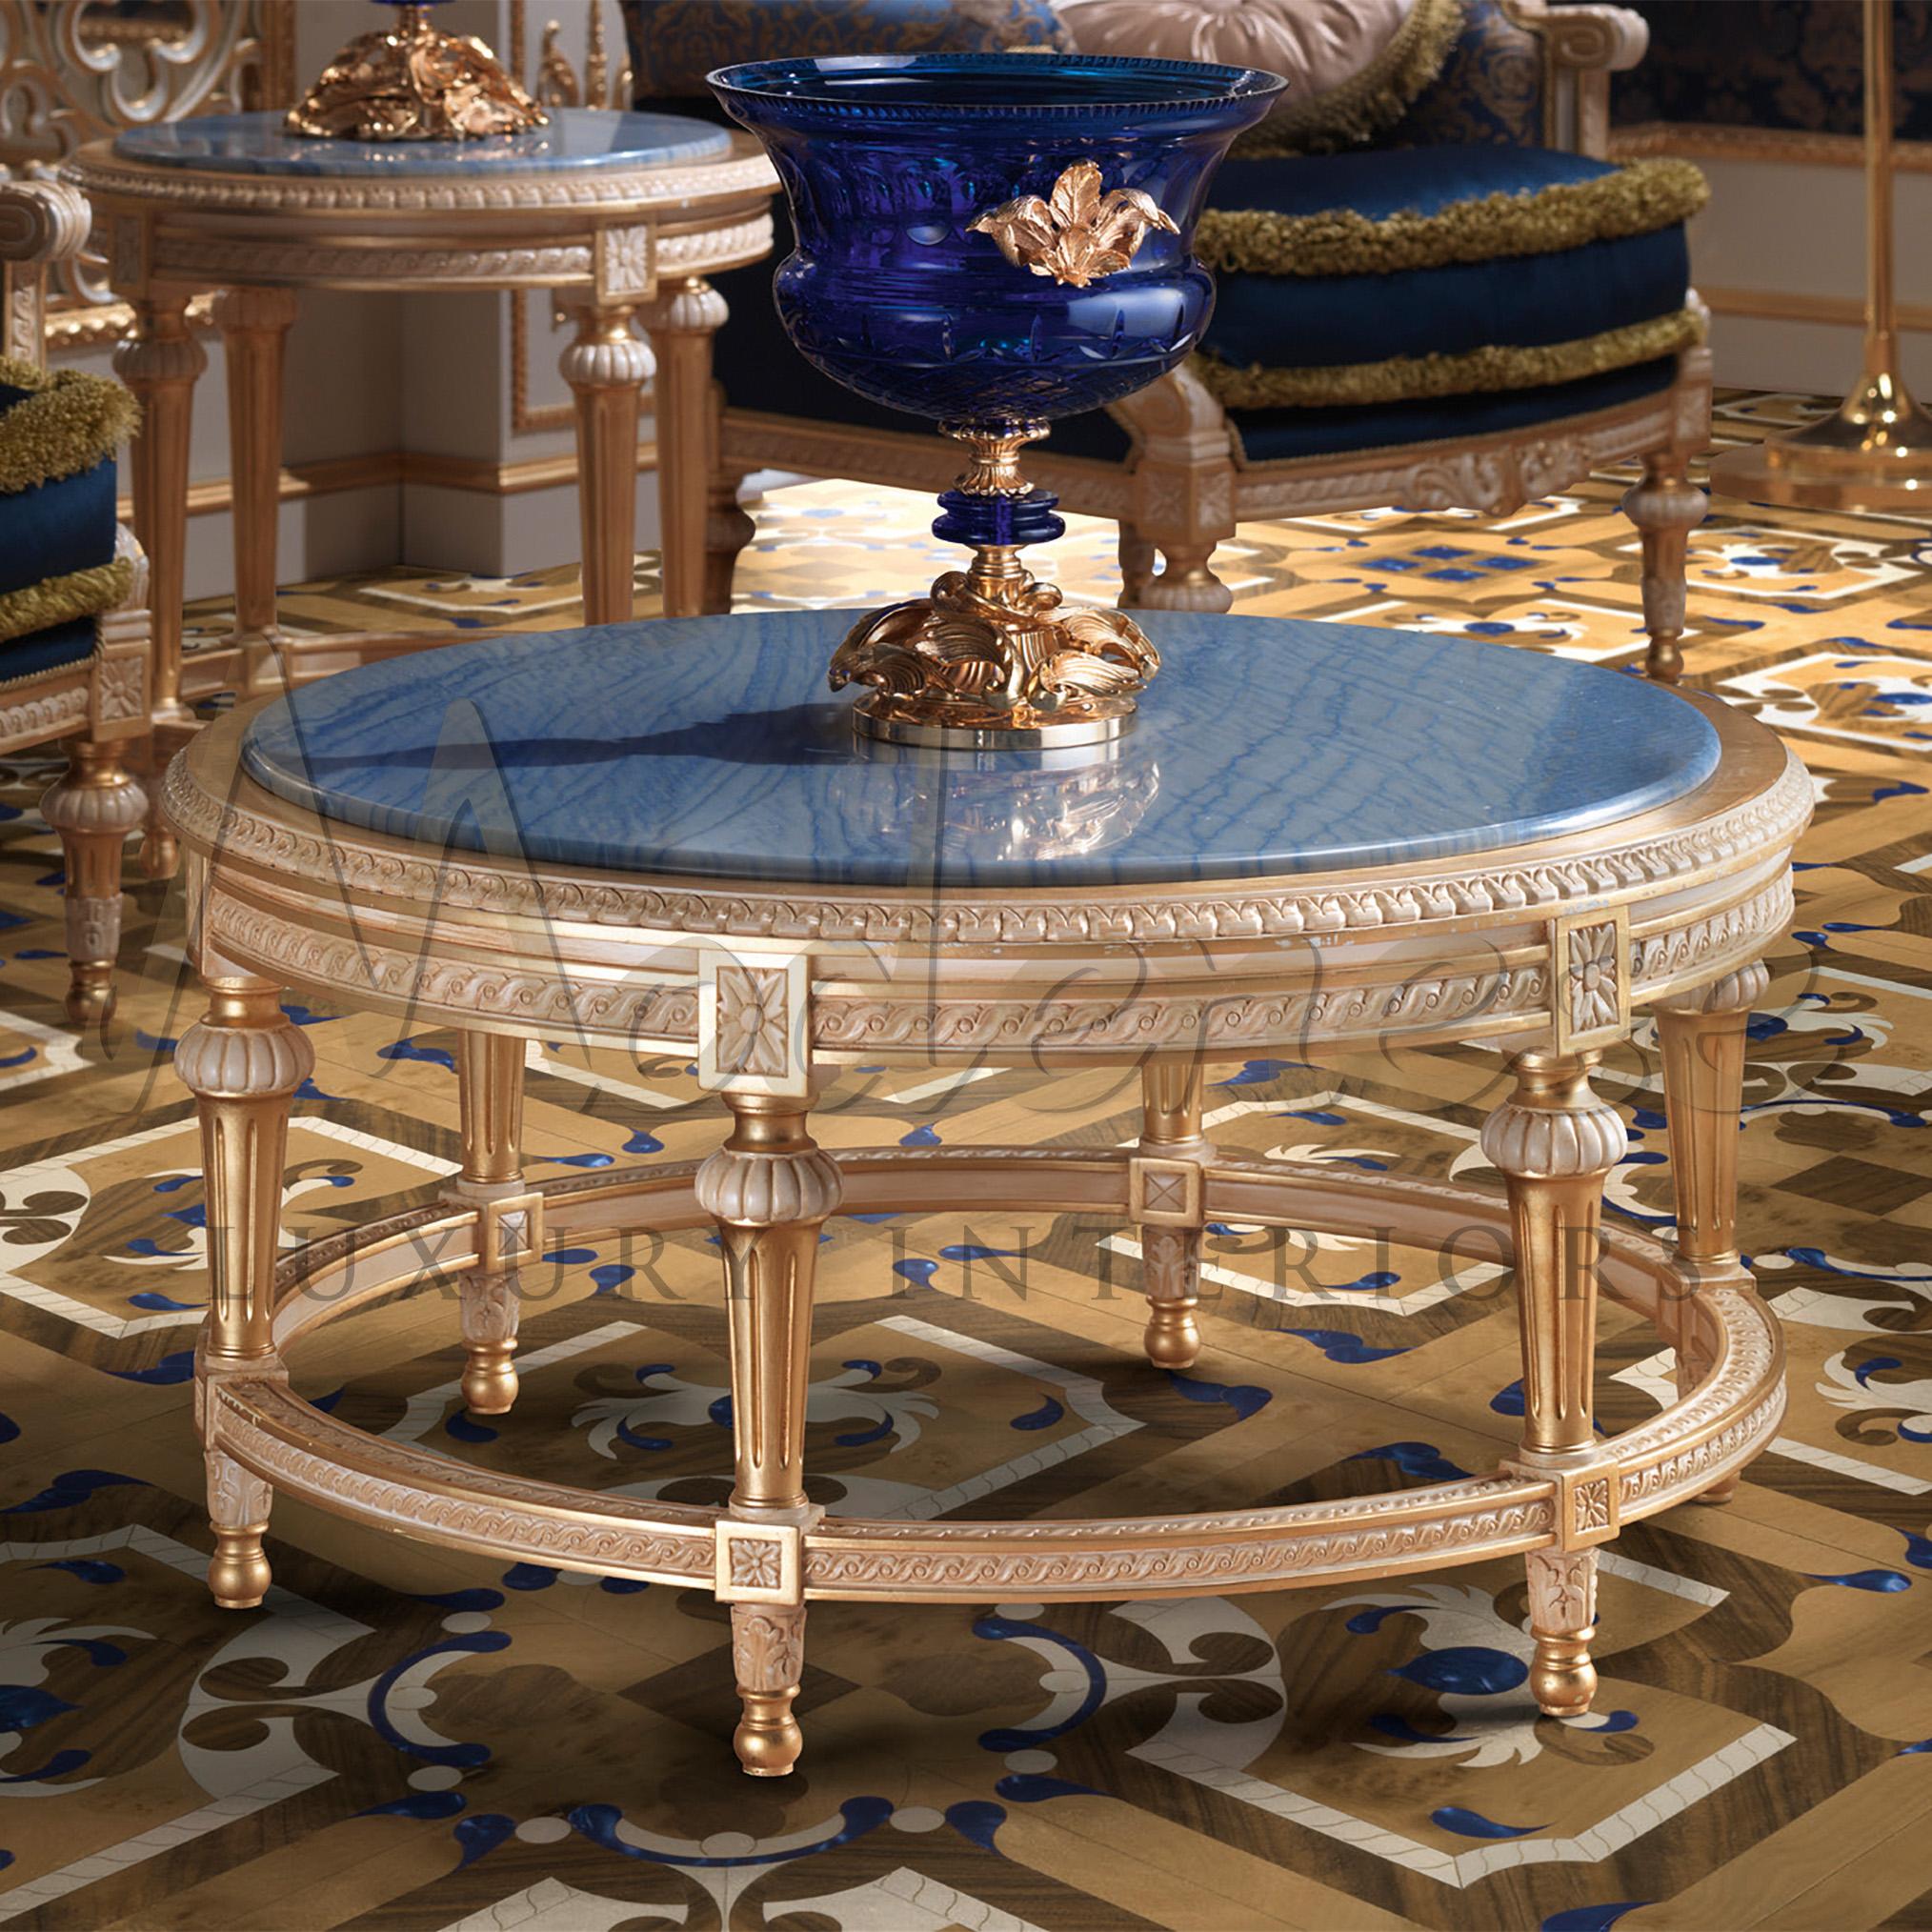 Modenese artisans kwoledge of gold leaf applications goes beyond imagination. The true essence of their work is shown through this magnificent round coffee table, that catches the eye with its tasteful combination of Azul Macaubas marble and shining